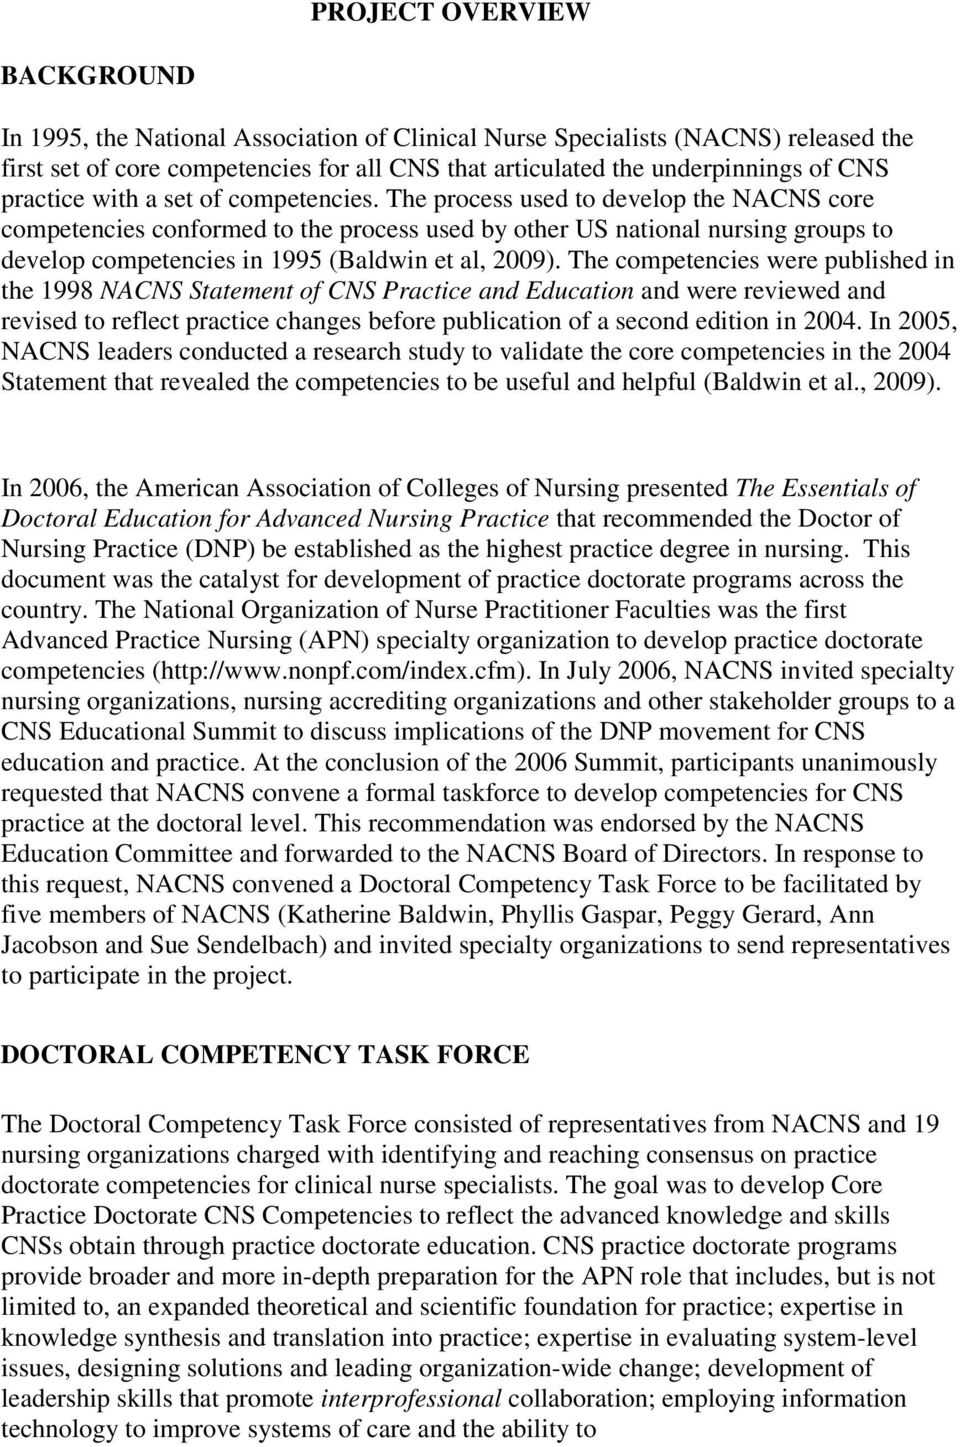 The process used to develop the NACNS core competencies conformed to the process used by other US national nursing groups to develop competencies in 1995 (Baldwin et al, 2009).